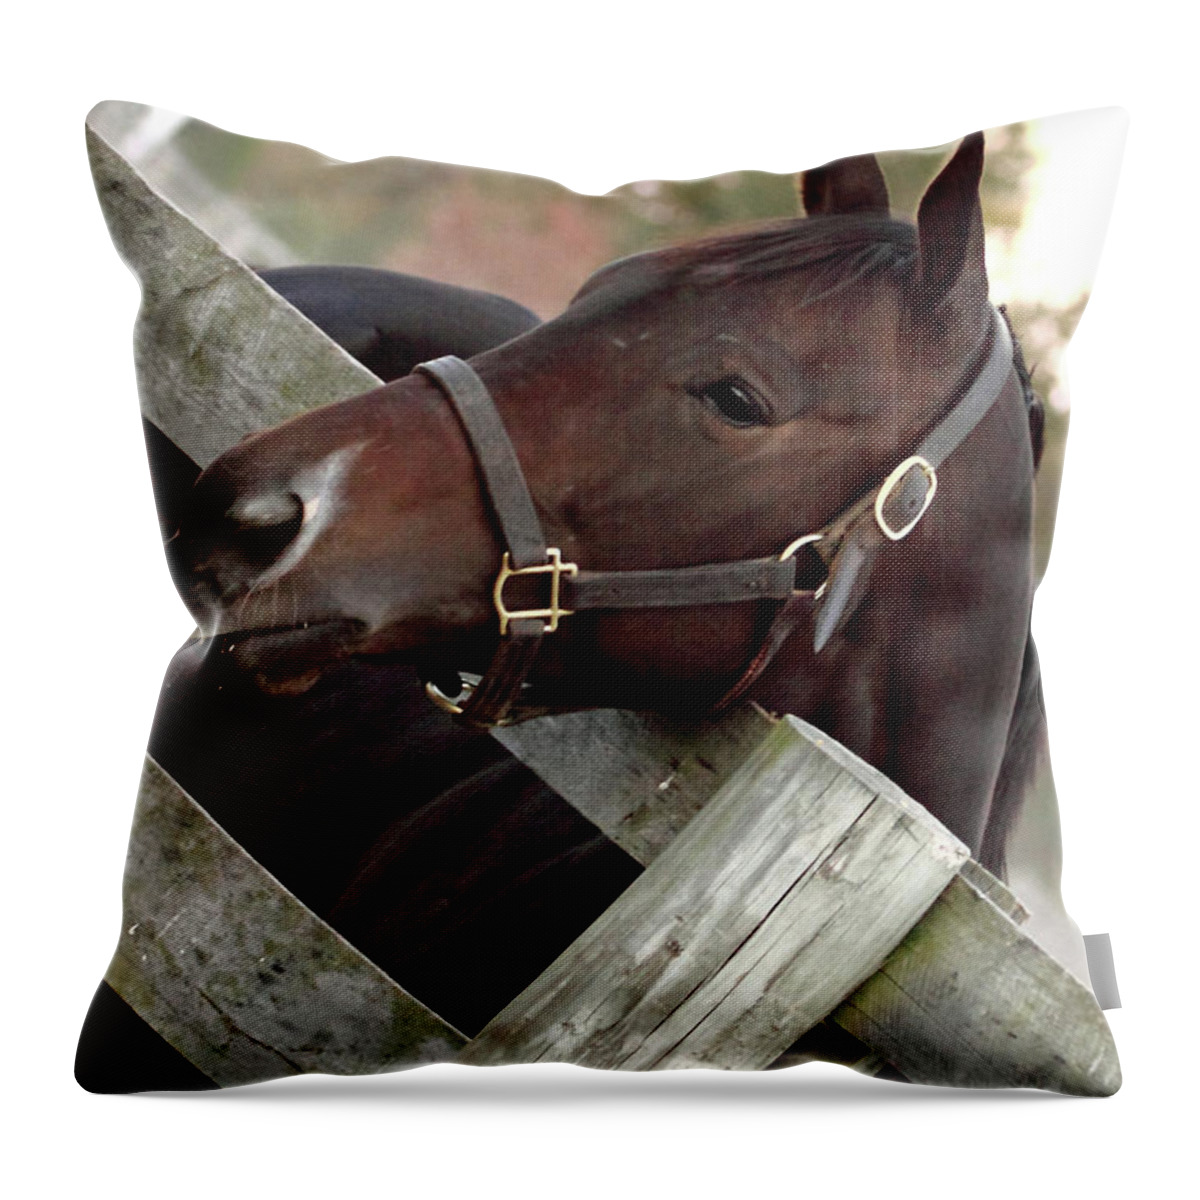 Pjq And Friends Photography Throw Pillow featuring the photograph 'Dreamcakes' by PJQandFriends Photography